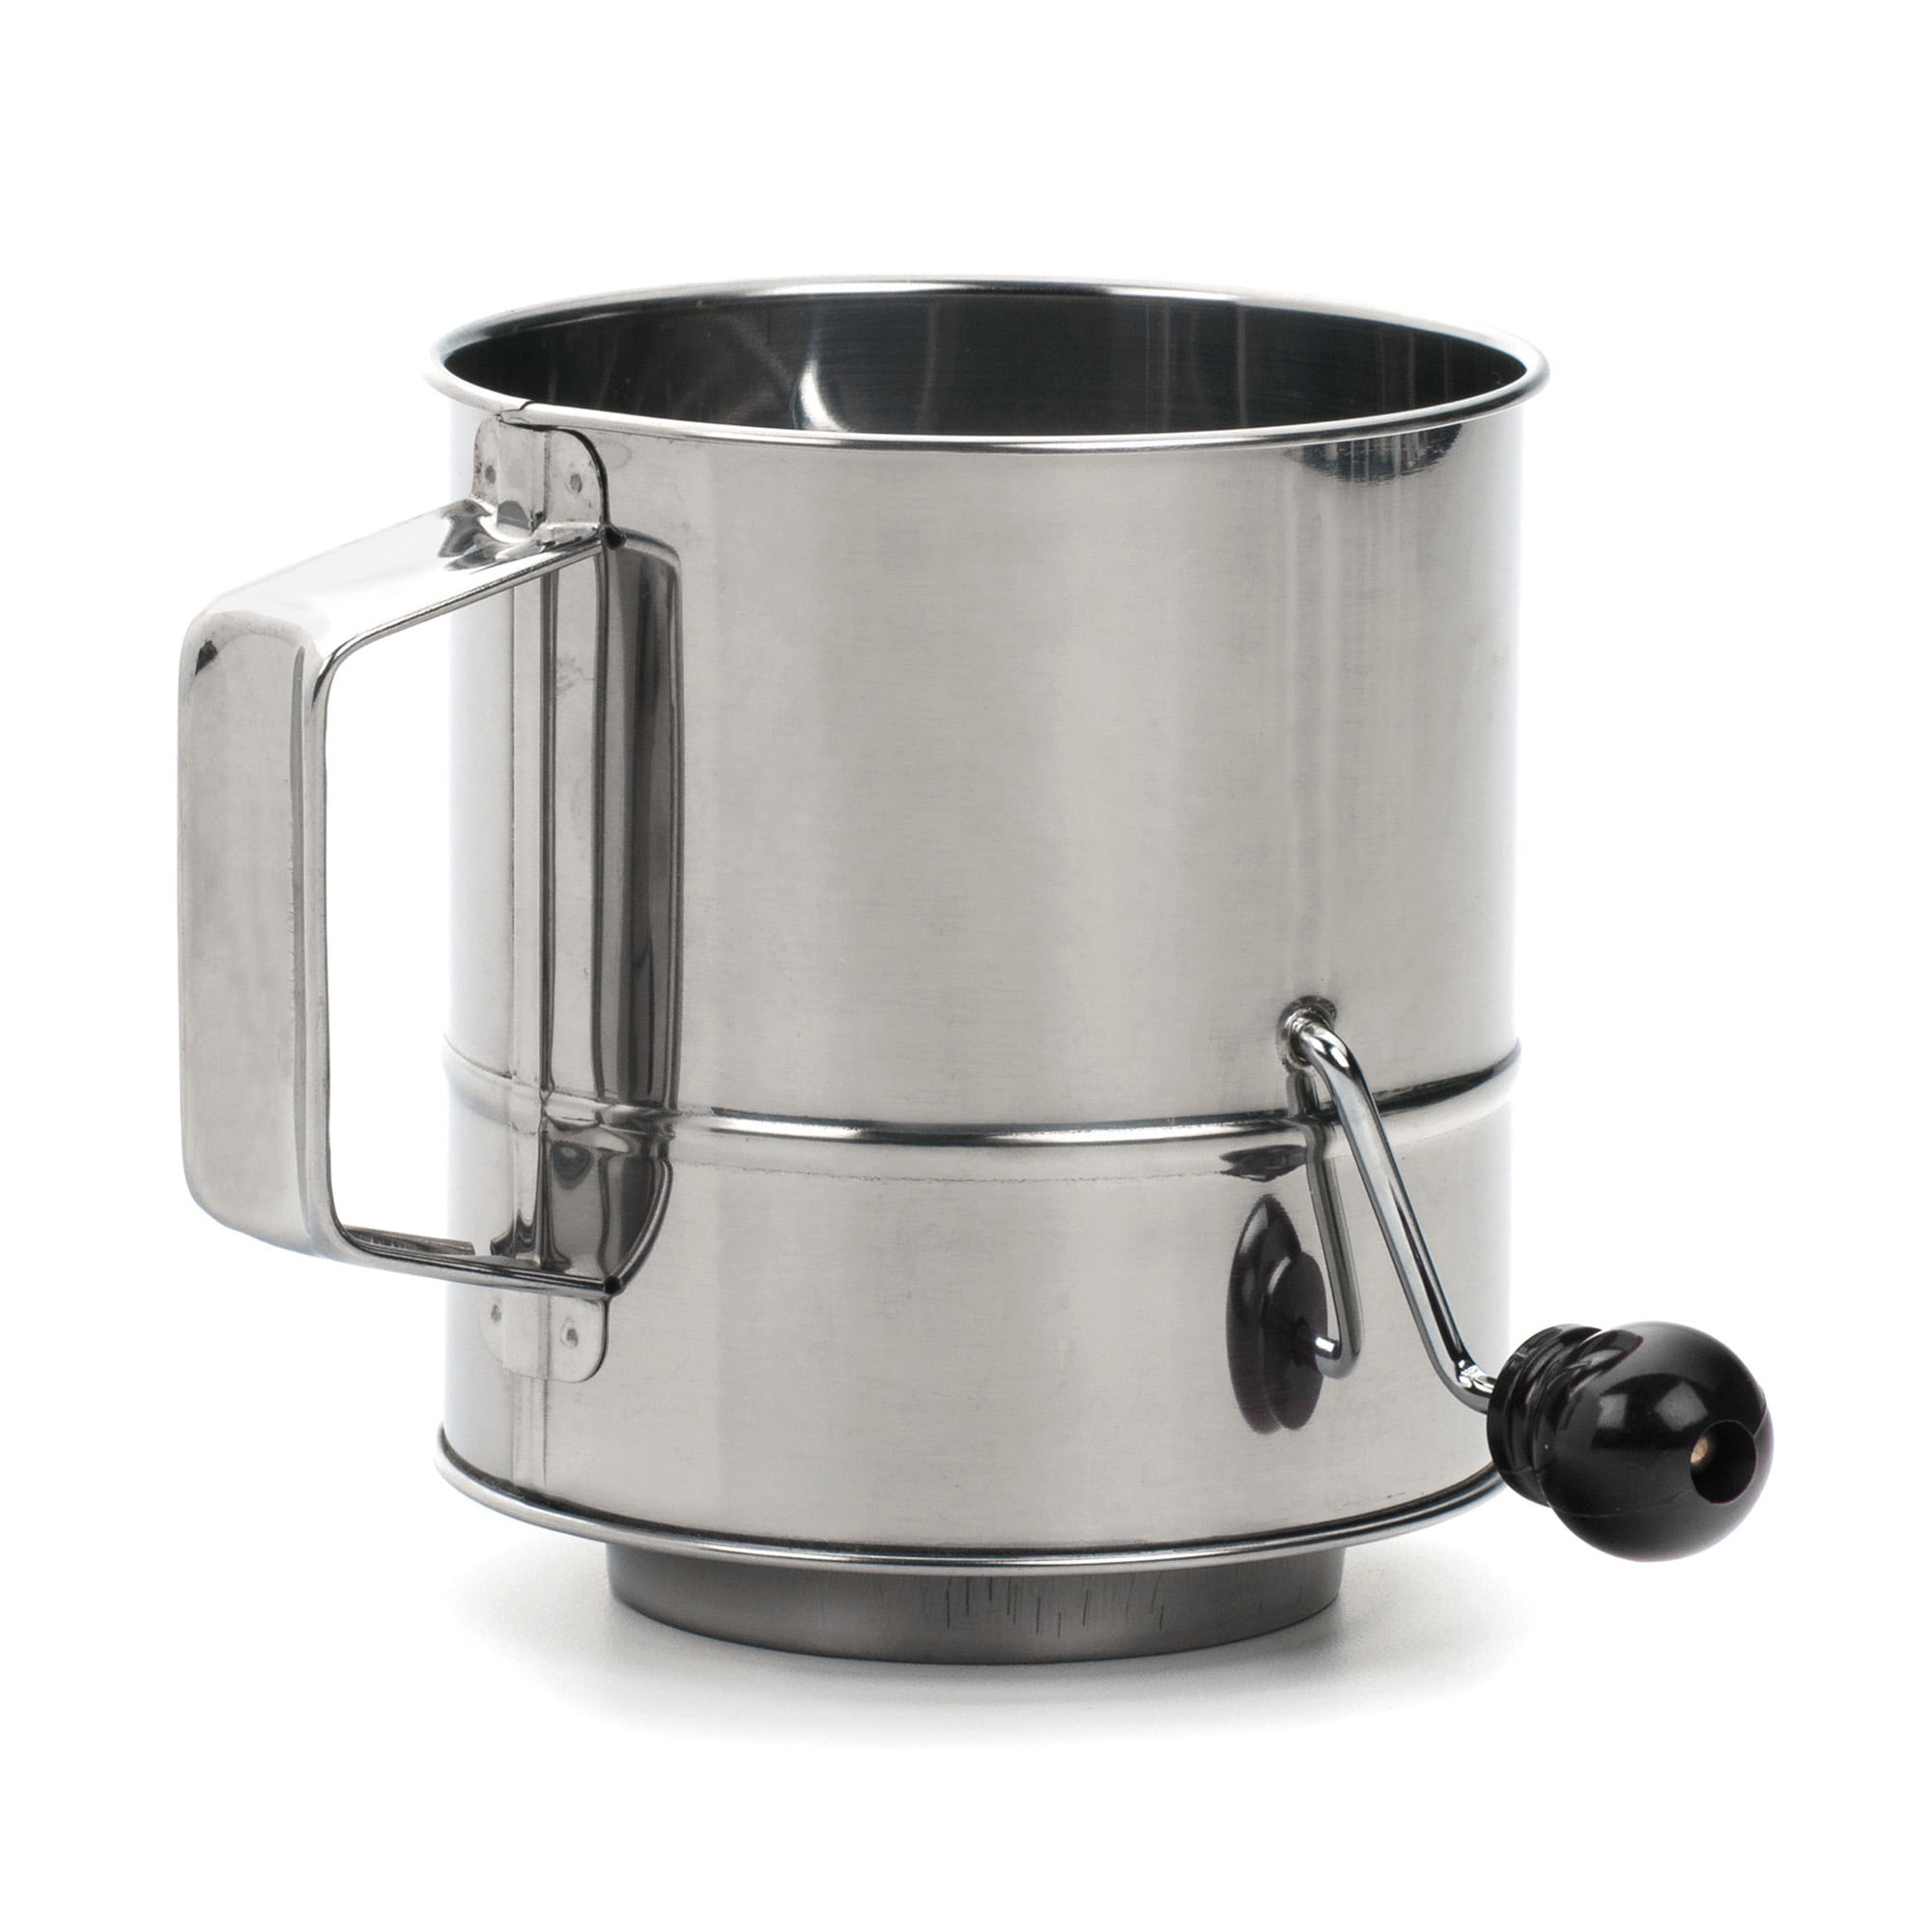 Mainstays Stainless Steel 3 Cup Flour Sifter with Beechwood Handle